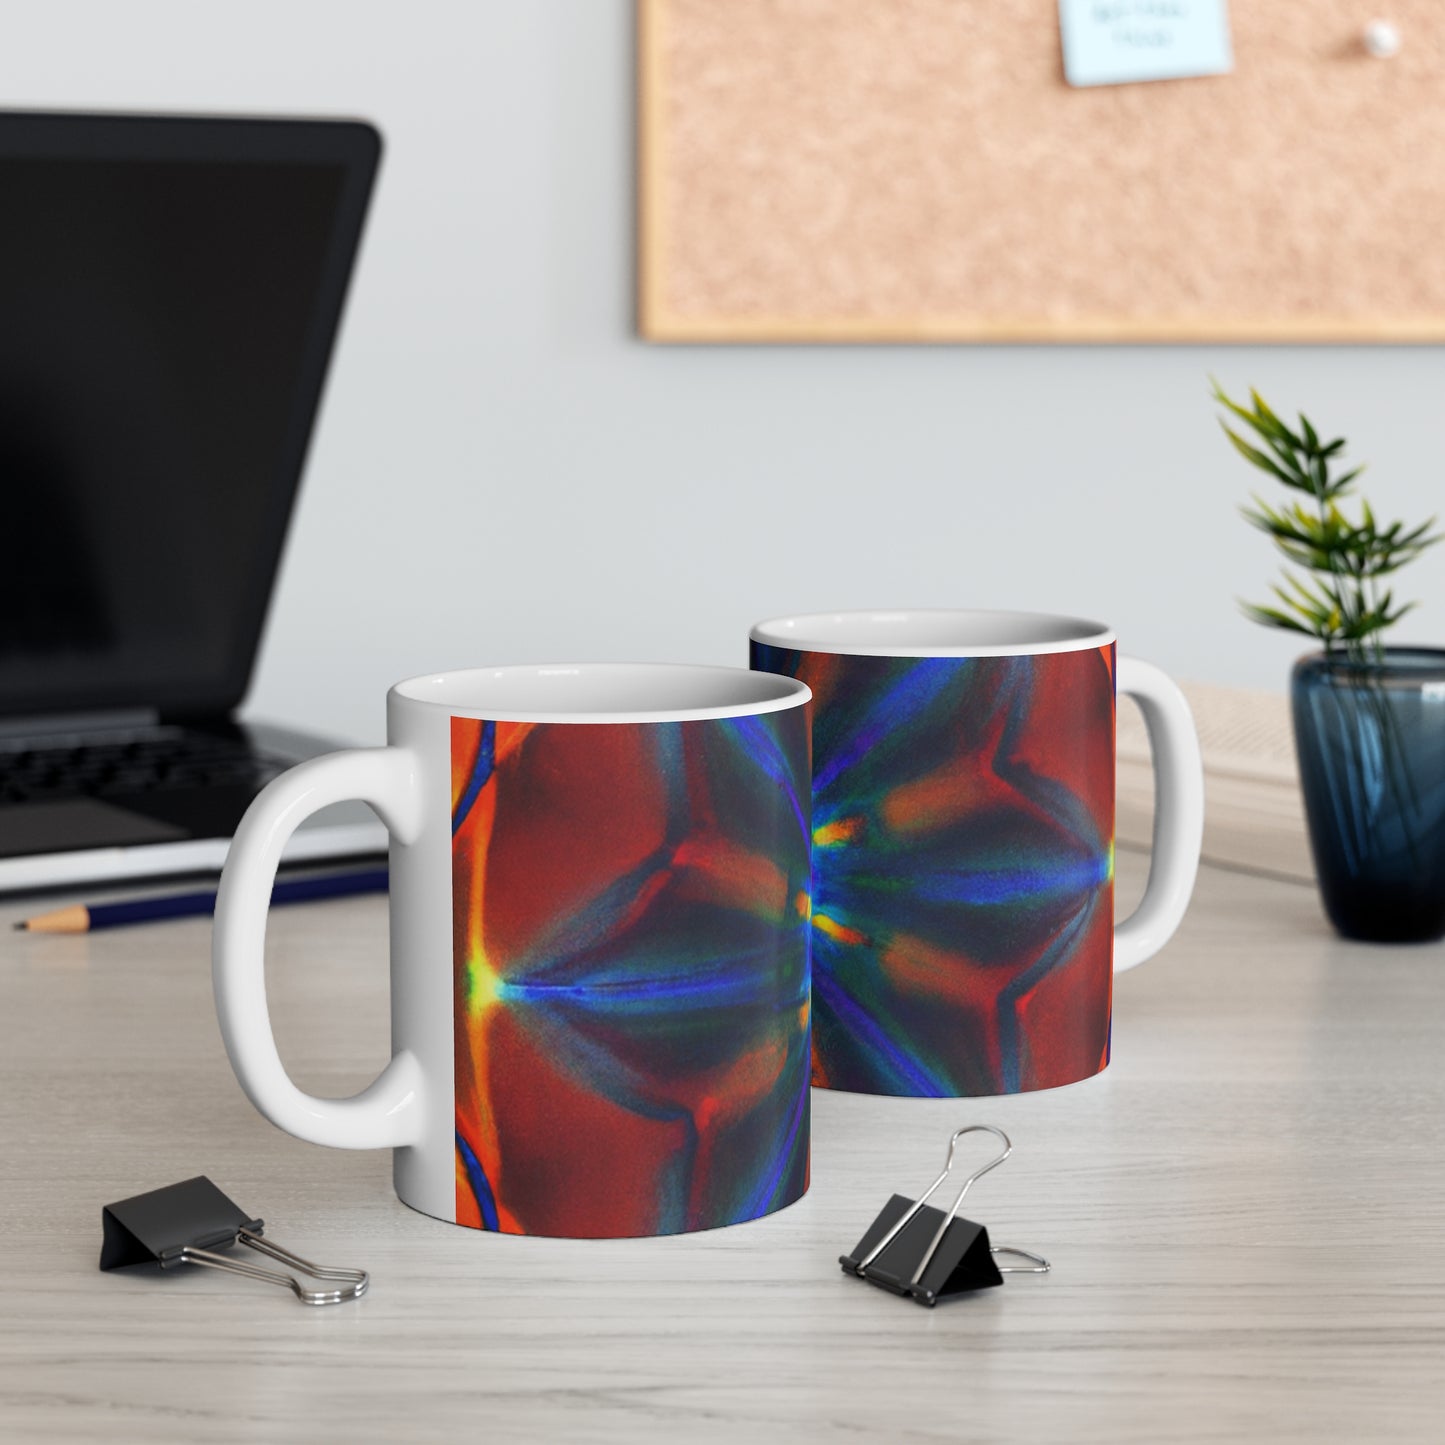 .

Winston's Roasts - Psychedelic Coffee Cup Mug 11 Ounce